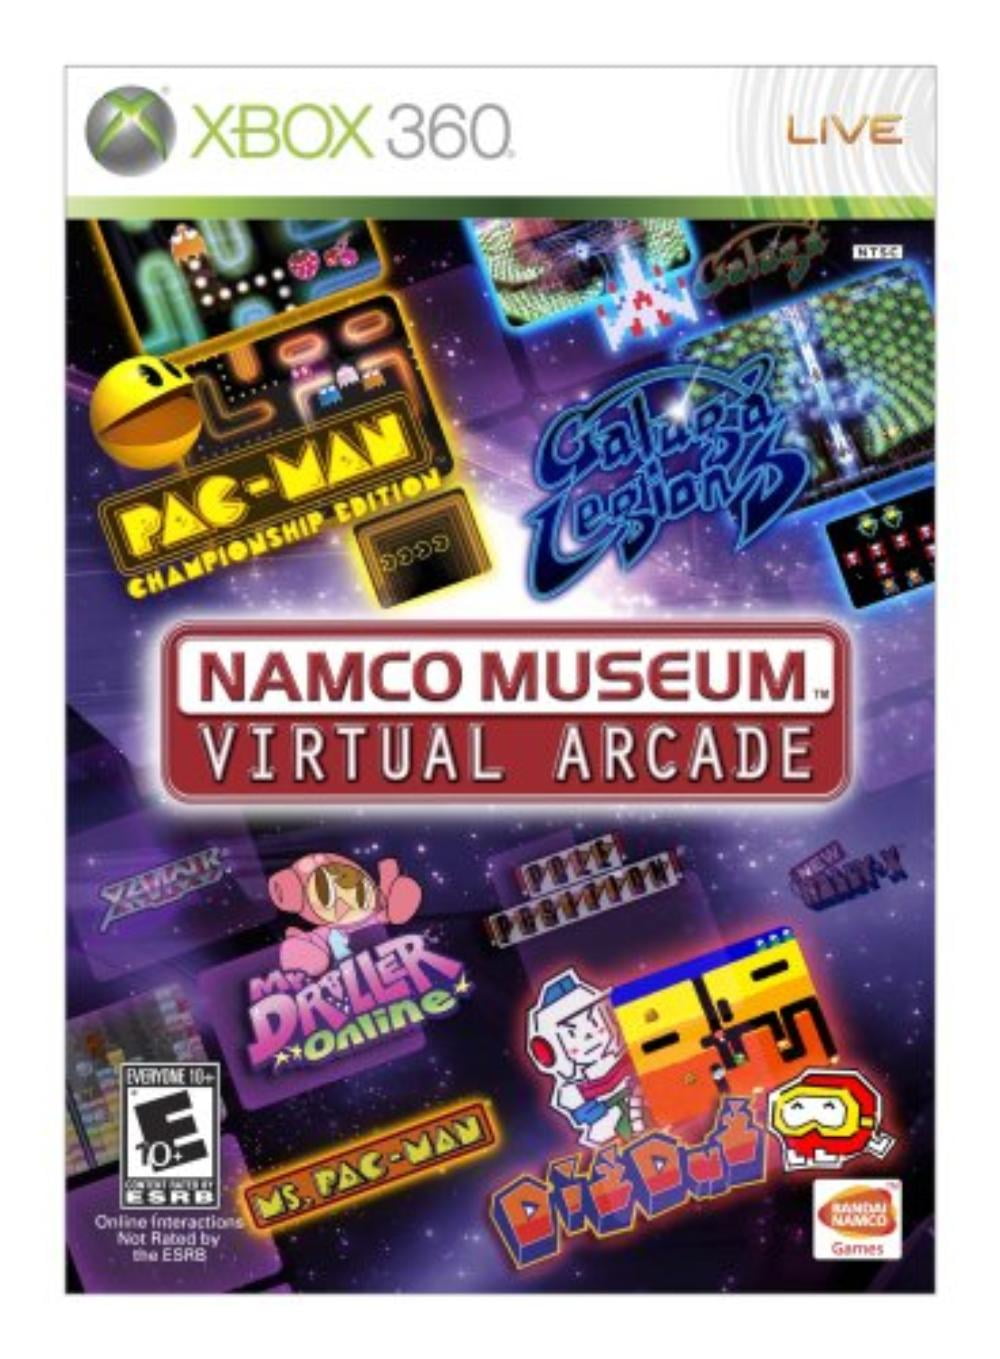 Namco Museum Virtual Arcade - Xbox 360, Over 30 Titles - The largest and most comprehensive Namco Museum collection to date will keep you and your friends.., By Brand BANDAI NAMCO Entertainment